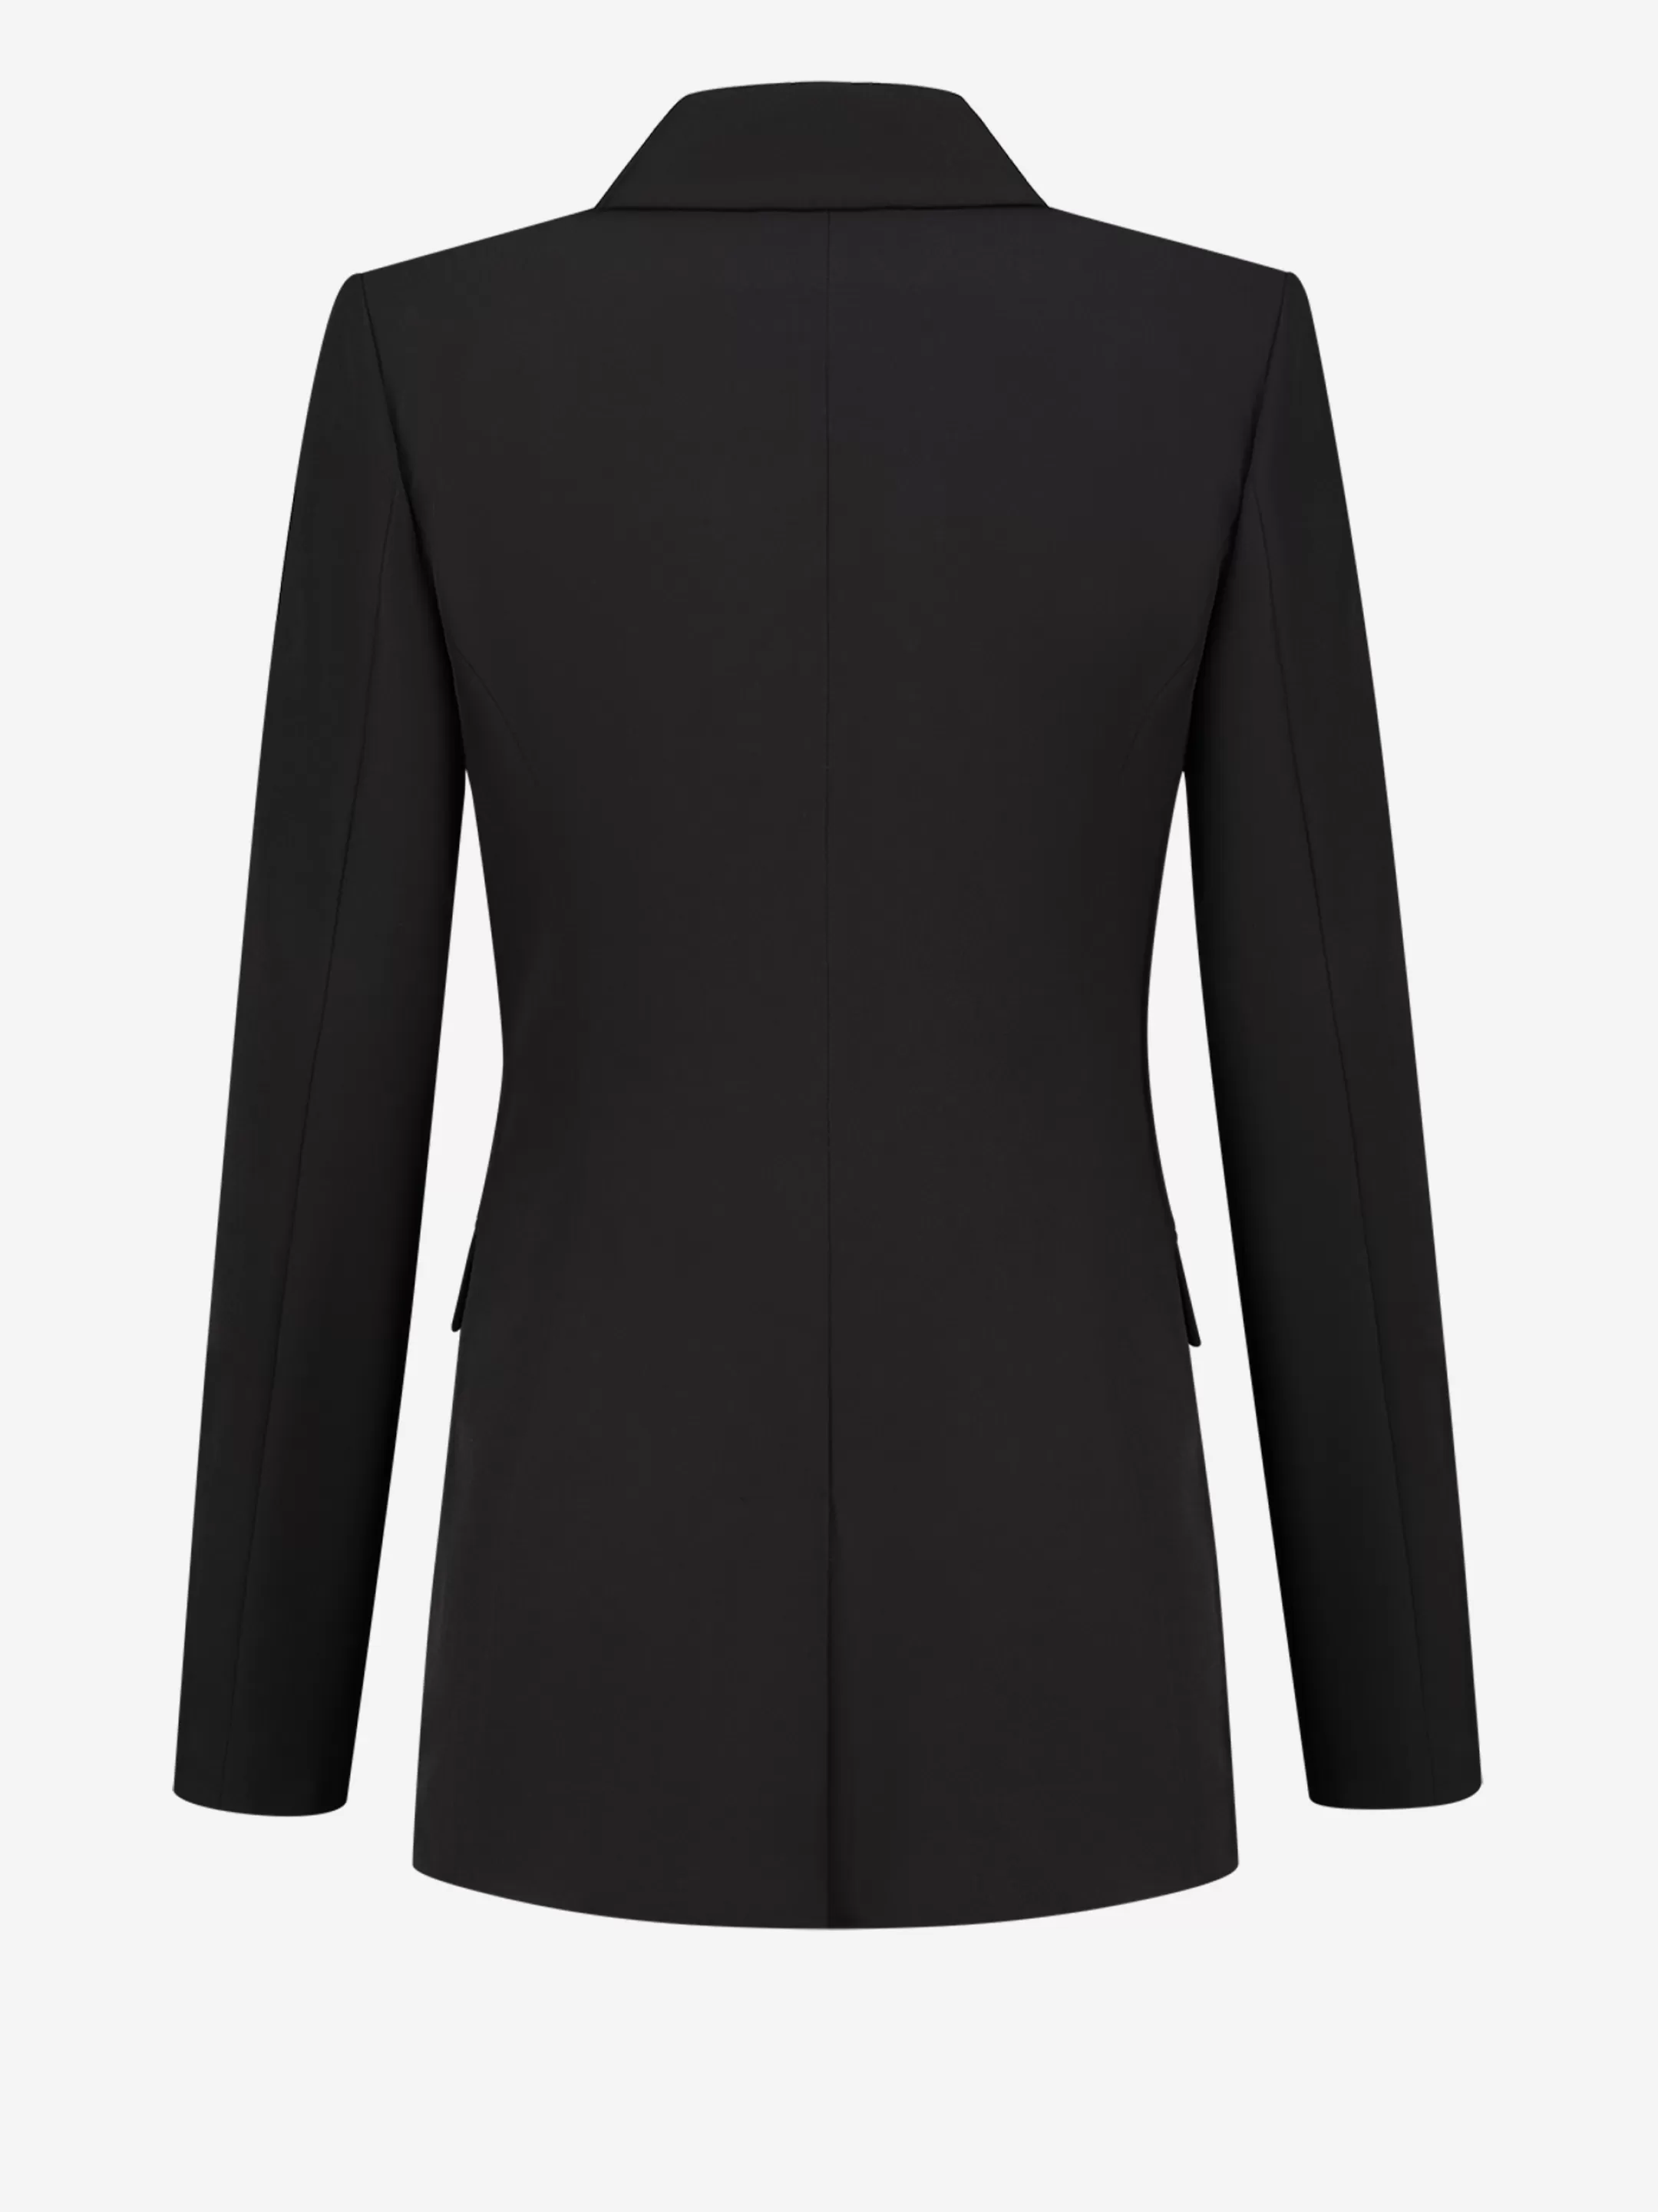 Cheap DOUBLE-BREASTED BLAZER Blazers | Sets